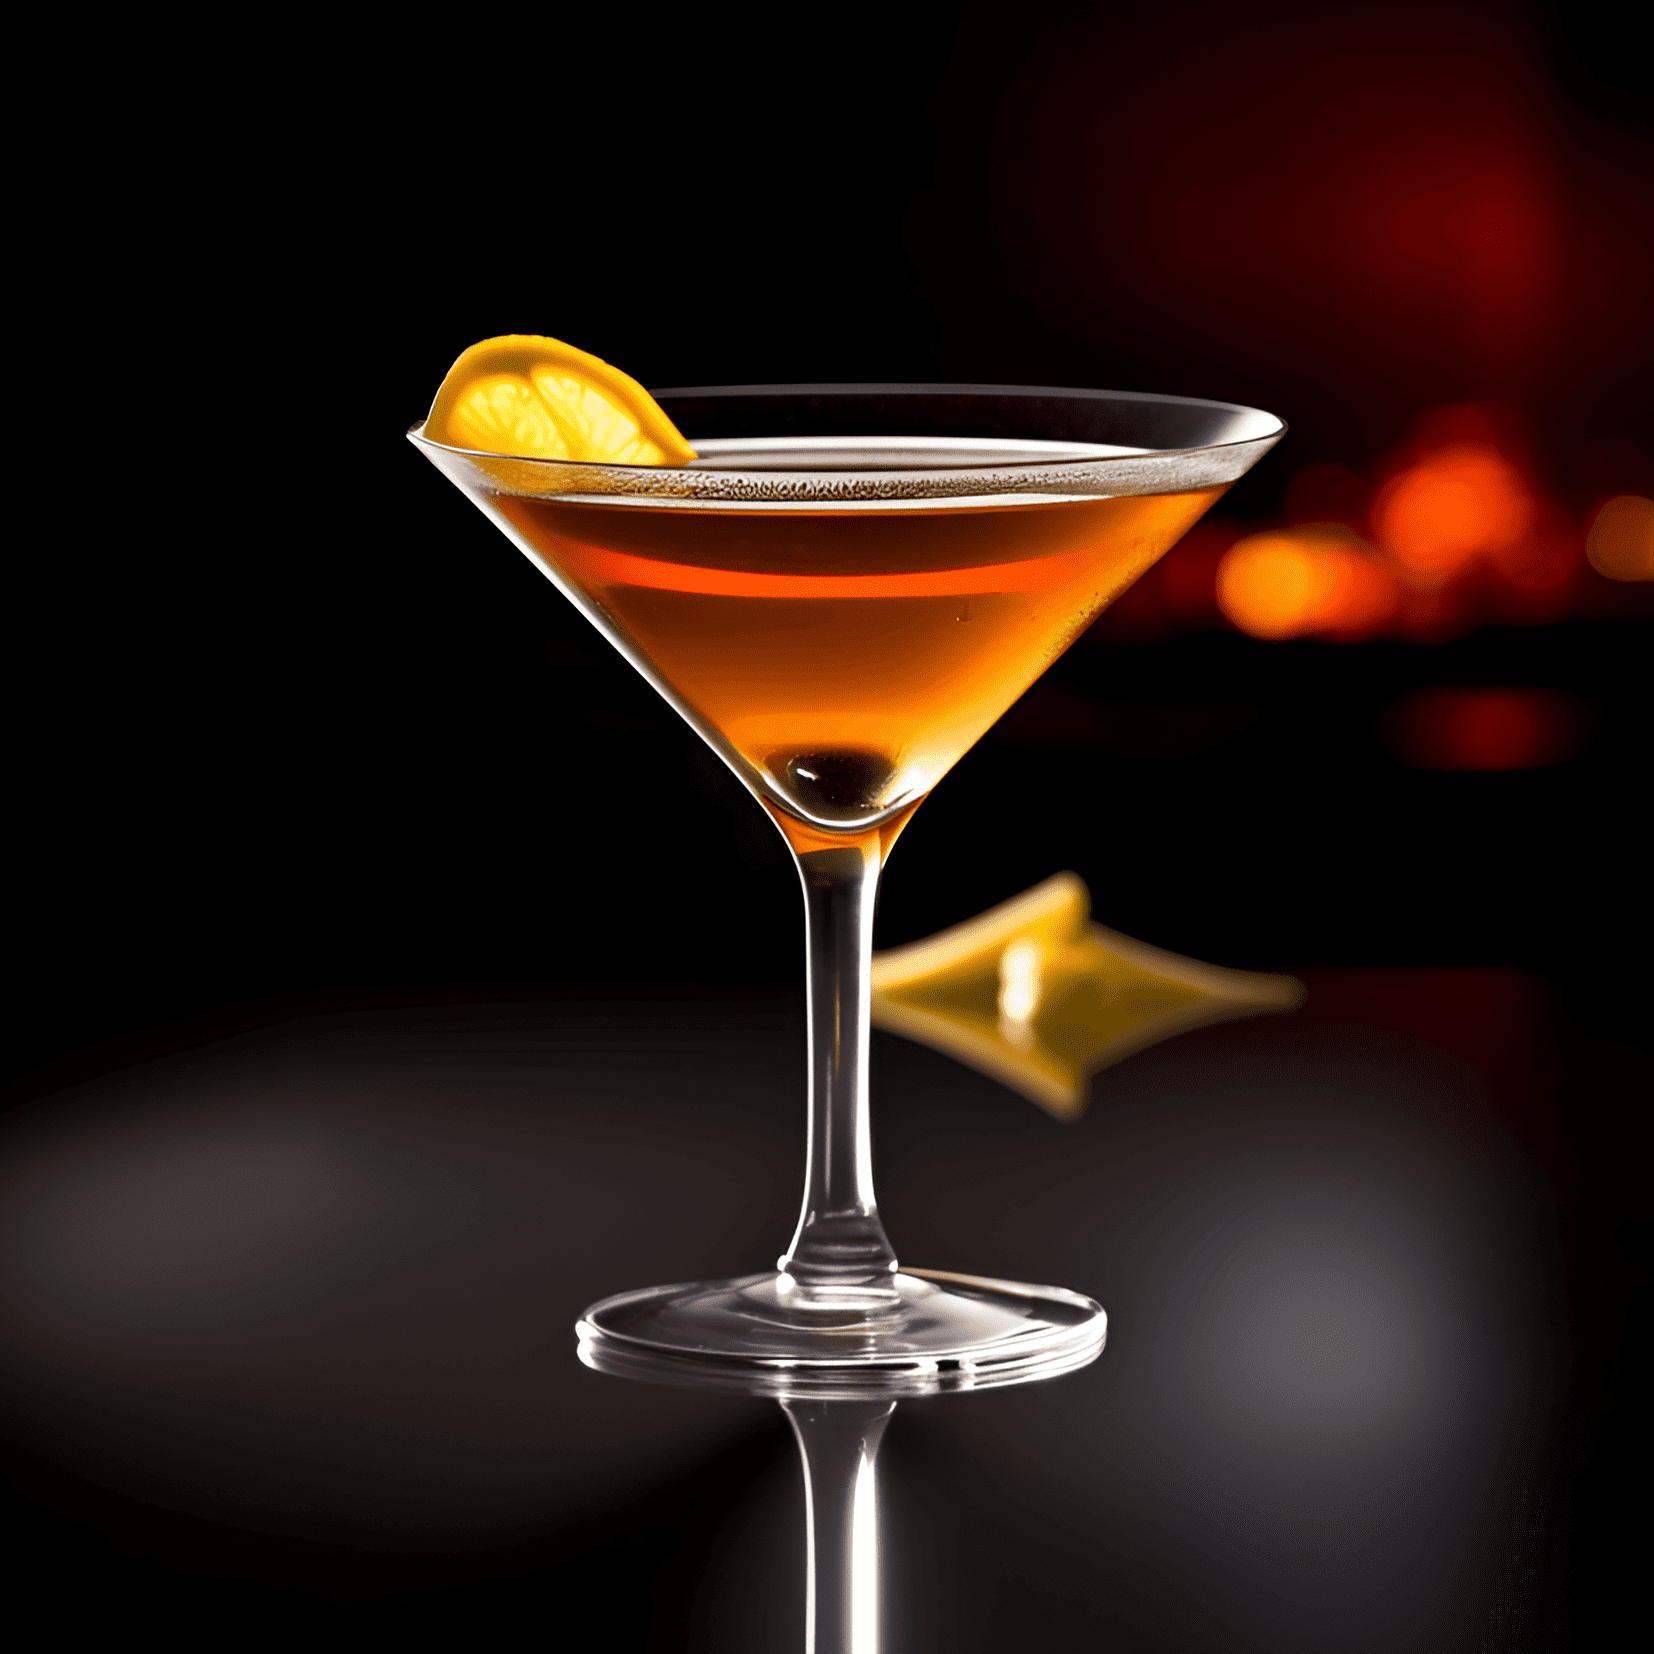 Opera Cocktail Recipe - The Opera cocktail is a harmonious blend of sweet, bitter, and fruity flavors. It has a rich, velvety texture and a complex taste profile that is both refreshing and satisfying.